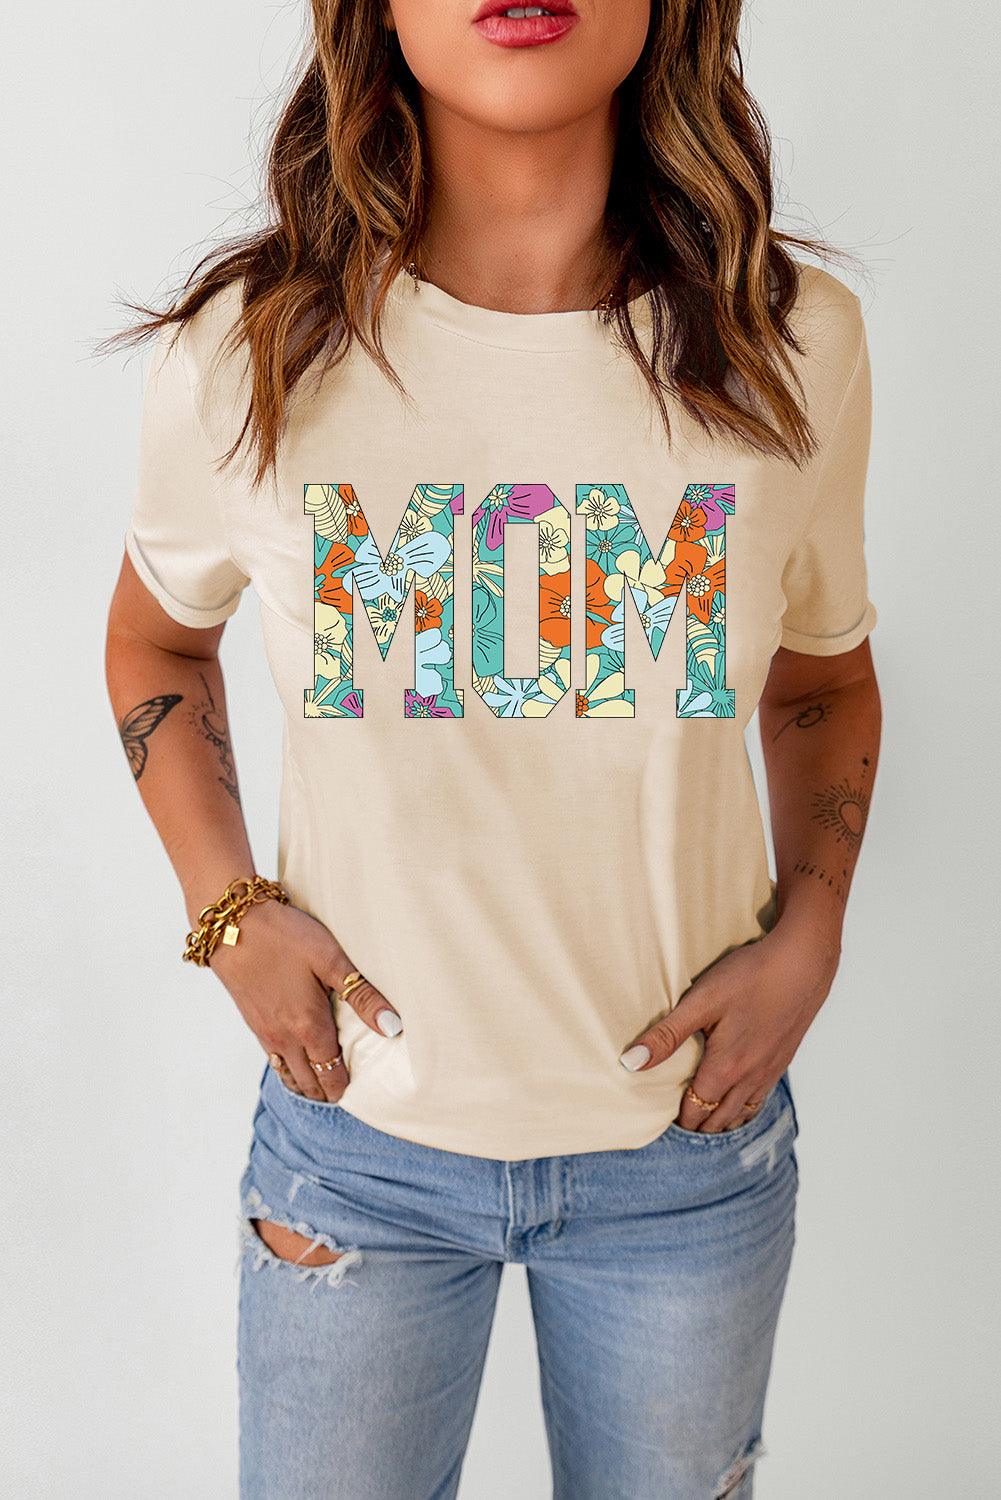 MOM Floral Graphic T-Shirt - Flyclothing LLC